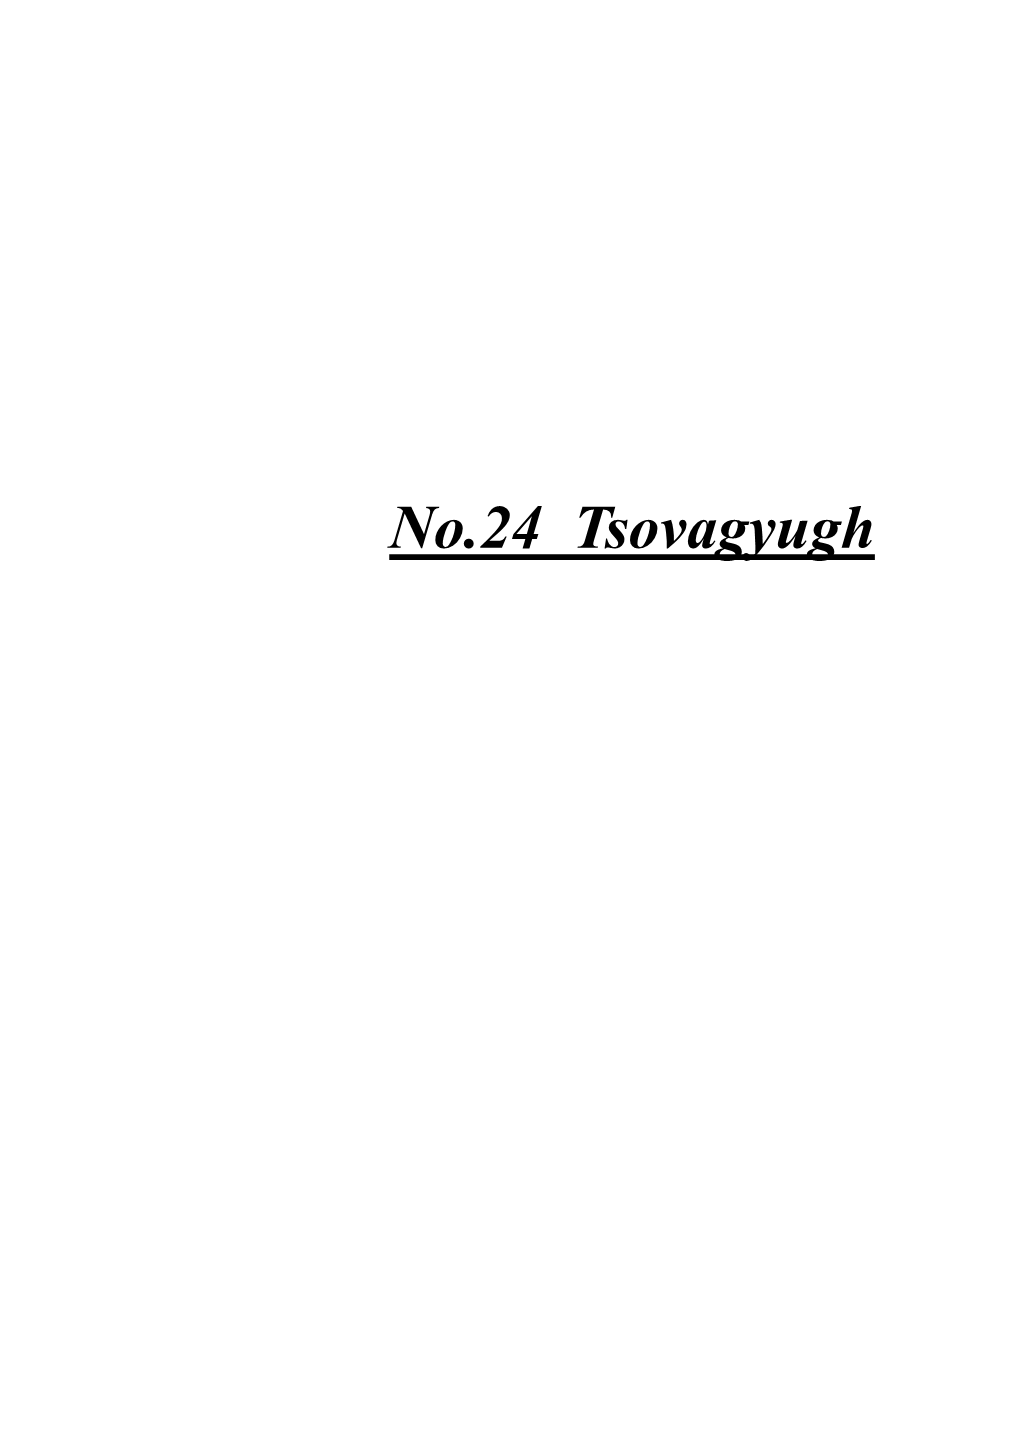 No.24 Tsovagyugh Study for Improvement of Information on Existing Water Sources Rural Water Supply and Sewage Systems in RA (Gegharkunik)